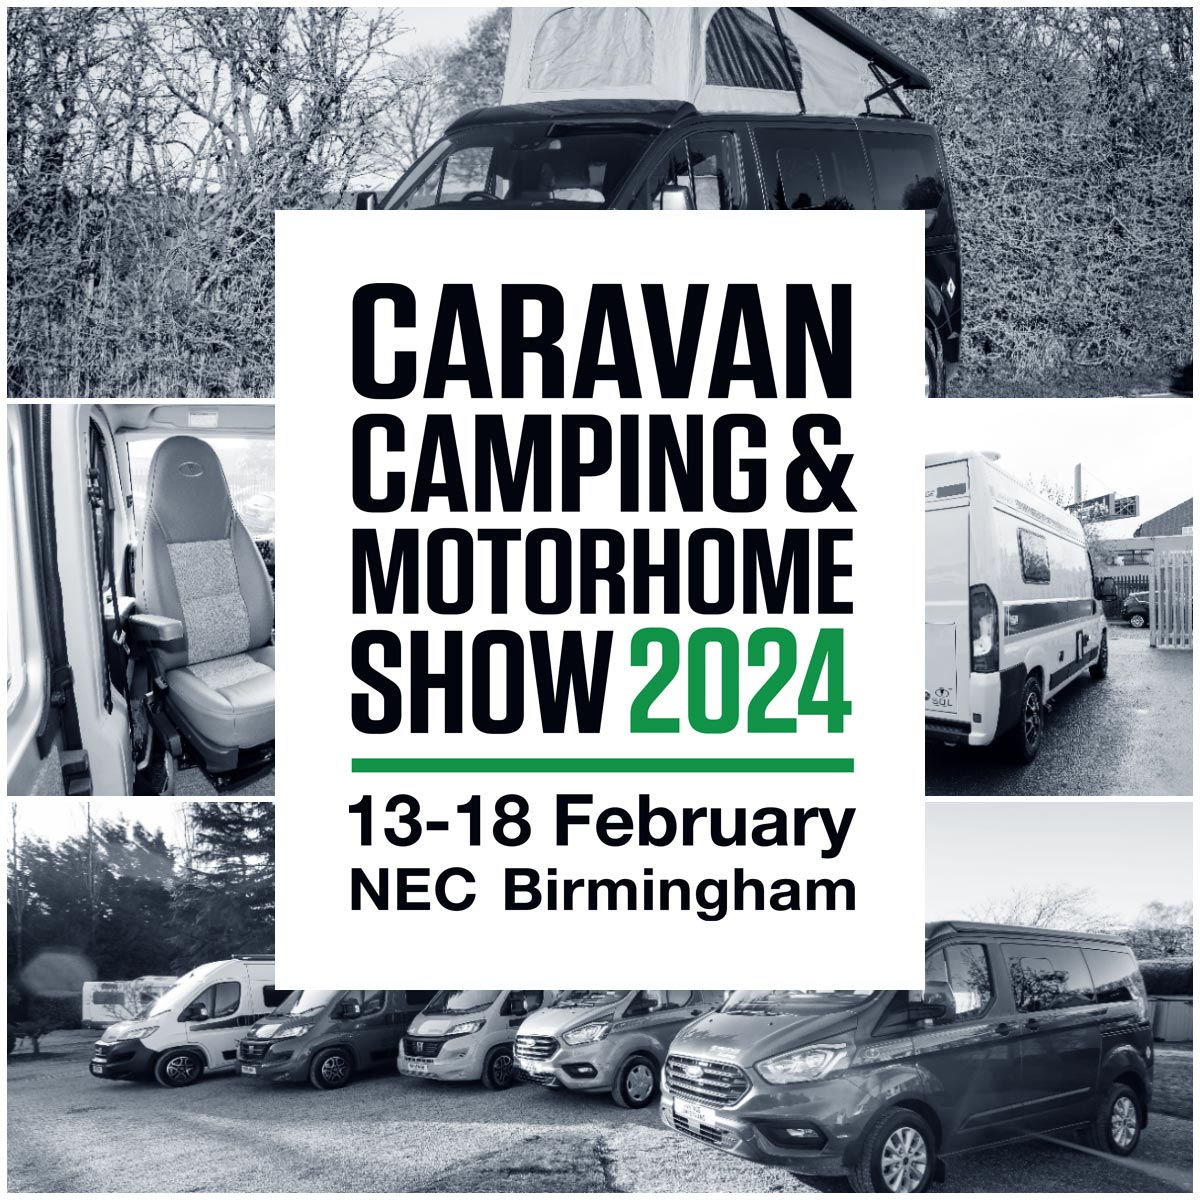 The Caravan, Camping &#038; Motorhome Show – NEC Stand 5010